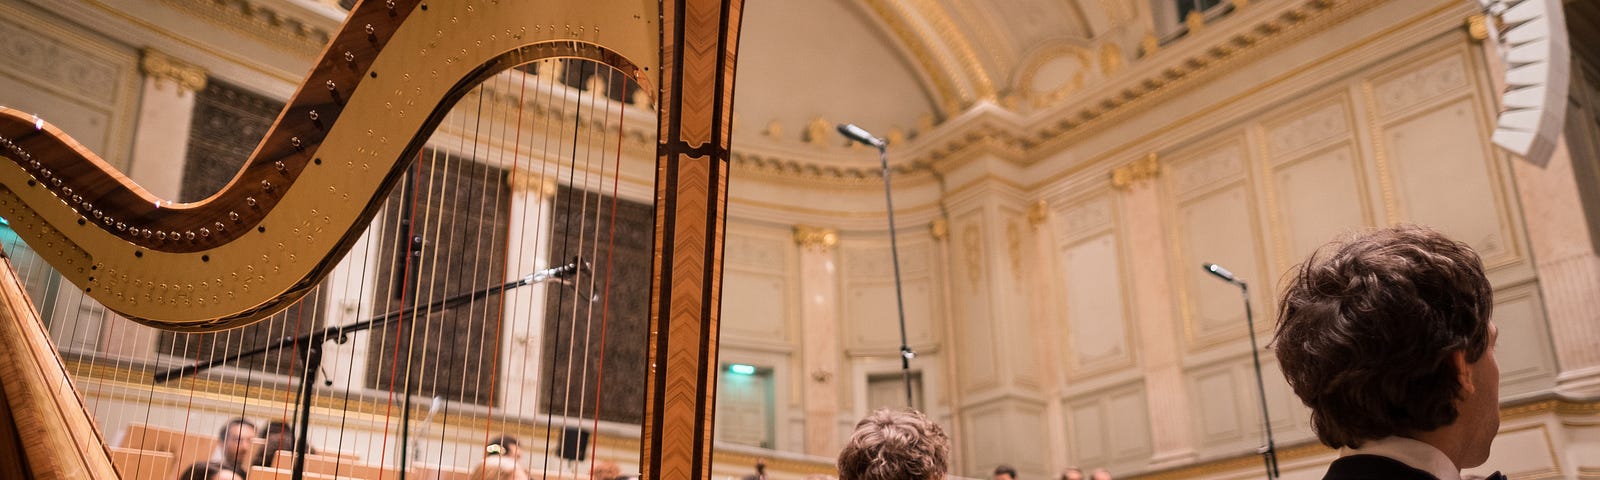 A photo of an orchestra in a concert hall. The harp is the main focus of the photo, with the back of the string section seen to the right of the harp.